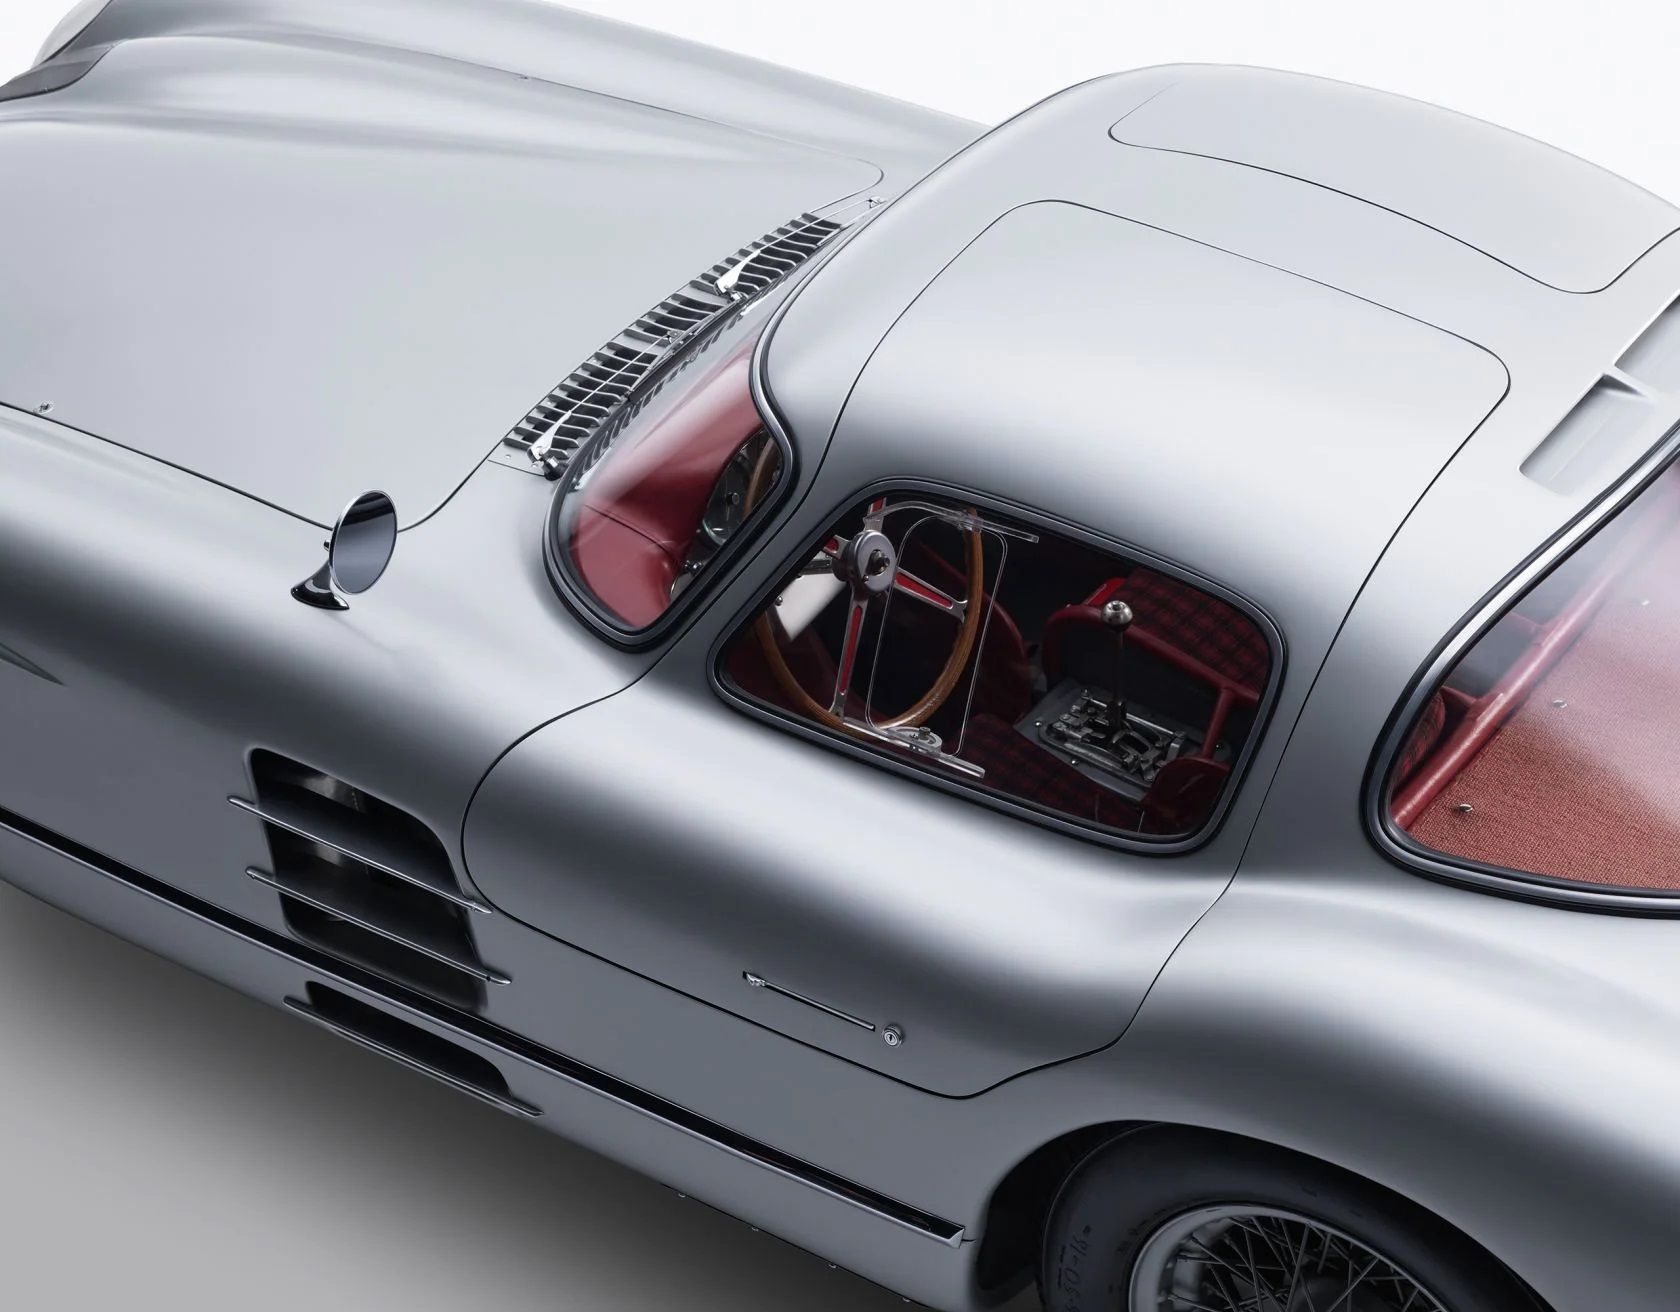 The closed top of the Mercedes-Benz 300 SLR Uhlenhaut Coupe.